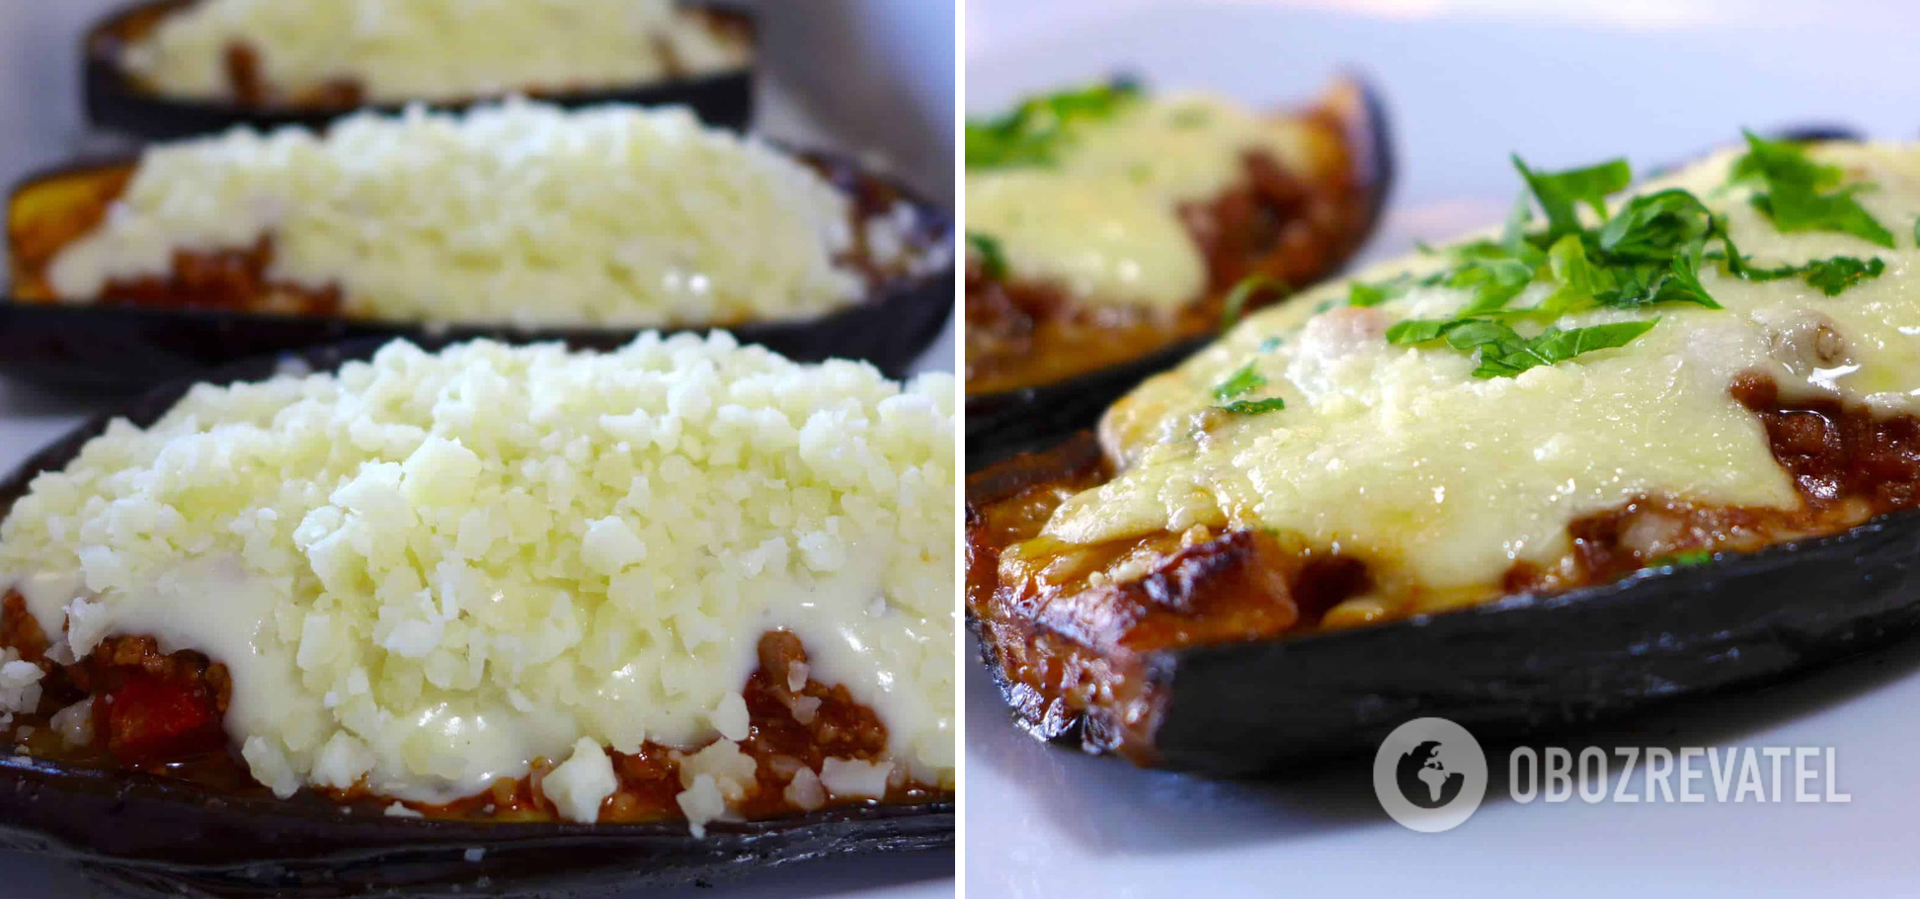 Baked eggplants with sauce and cheese